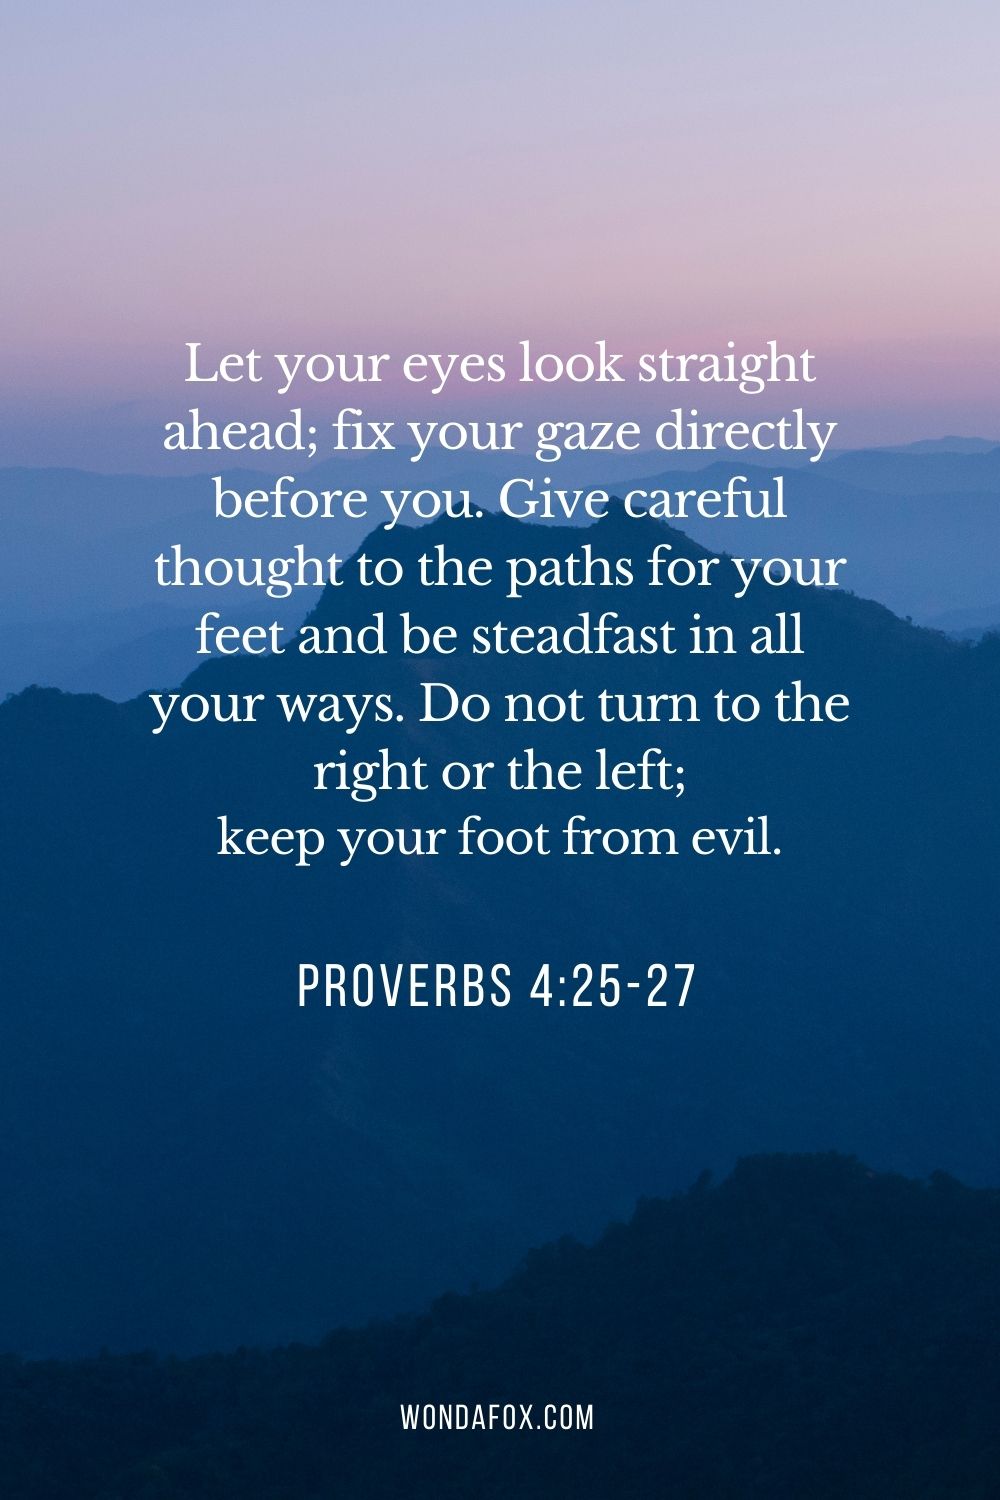 Let your eyes look straight ahead; fix your gaze directly before you. Give careful thought to the paths for your feet and be steadfast in all your ways. Do not turn to the right or the left; keep your foot from evil.